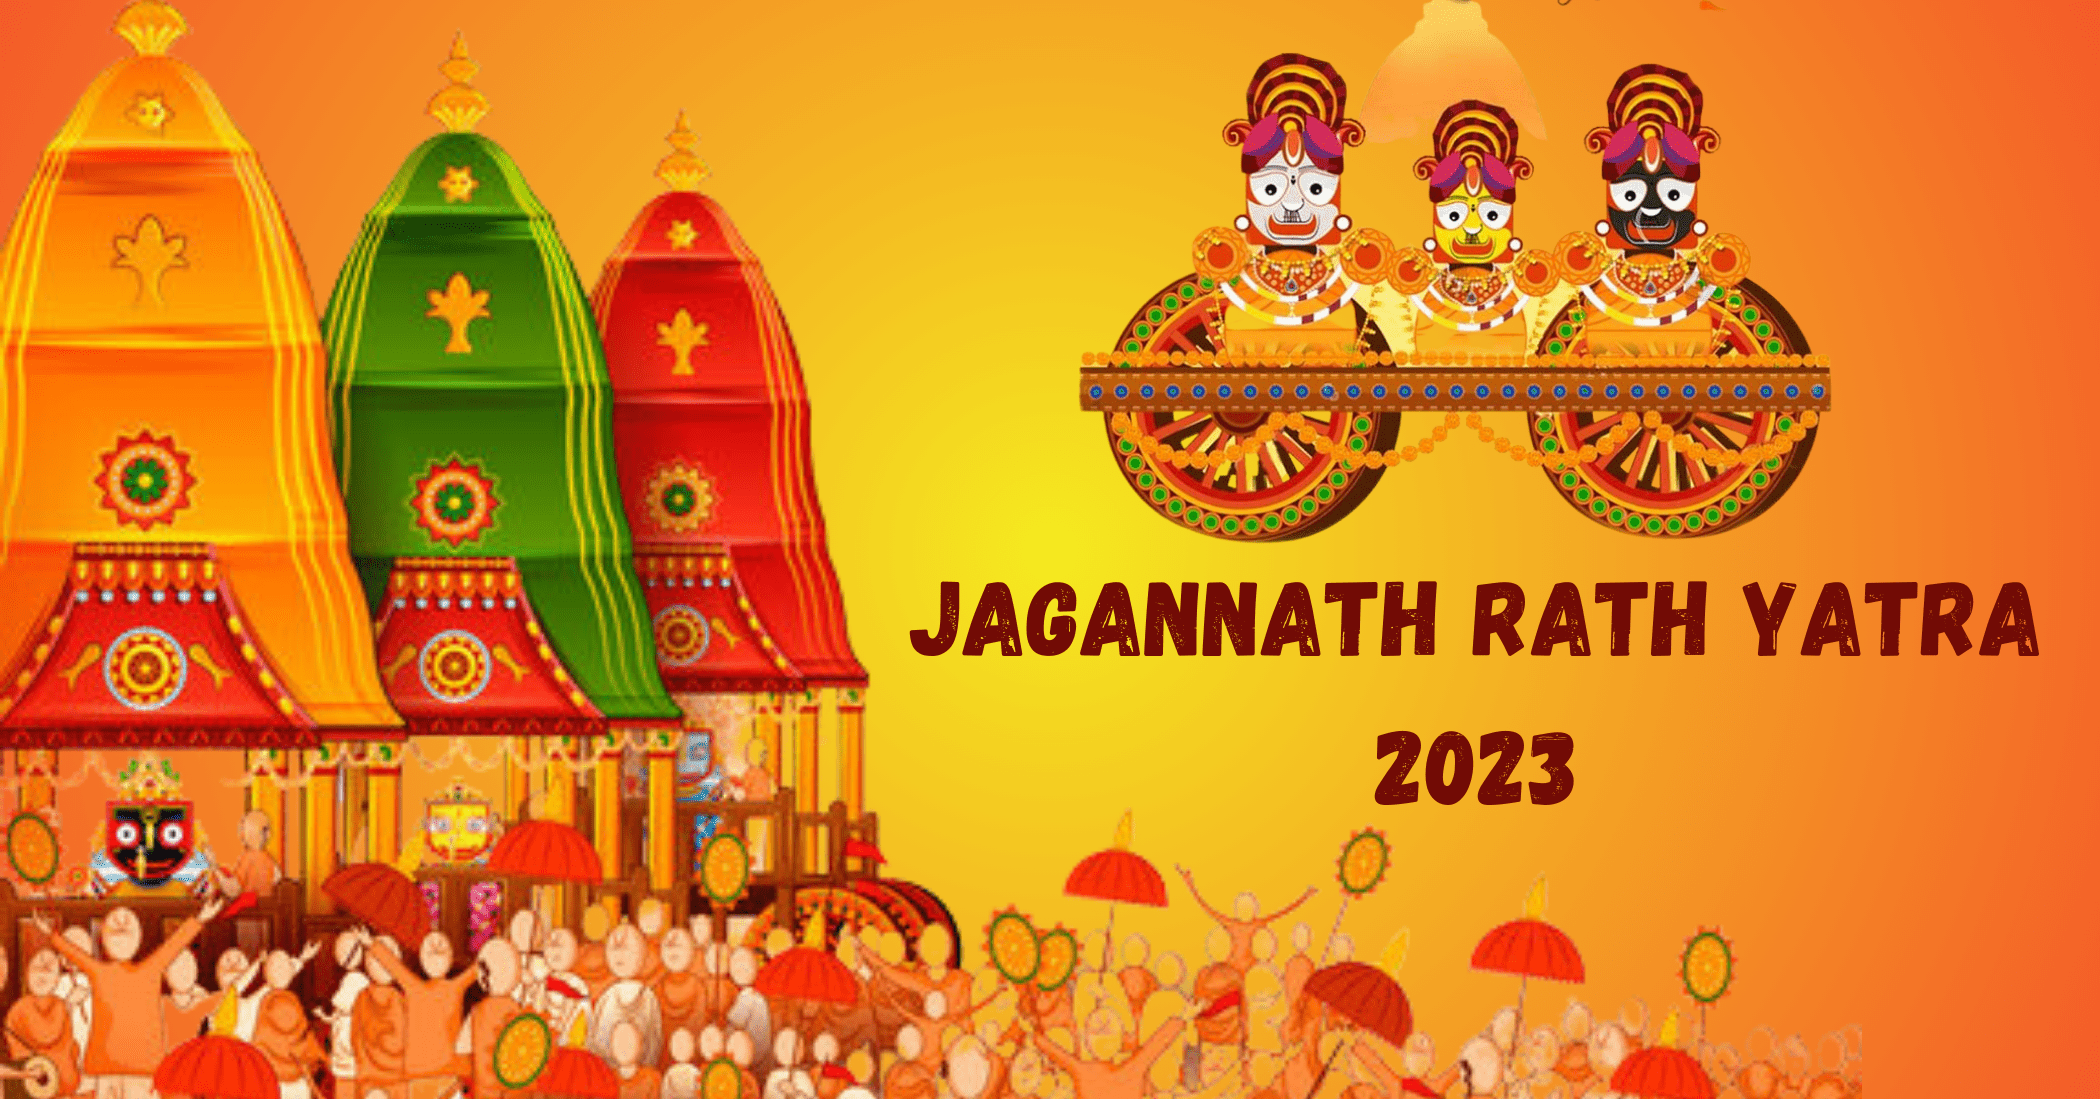 The How, Why, and When of Jagannath Rath Yatra 2023